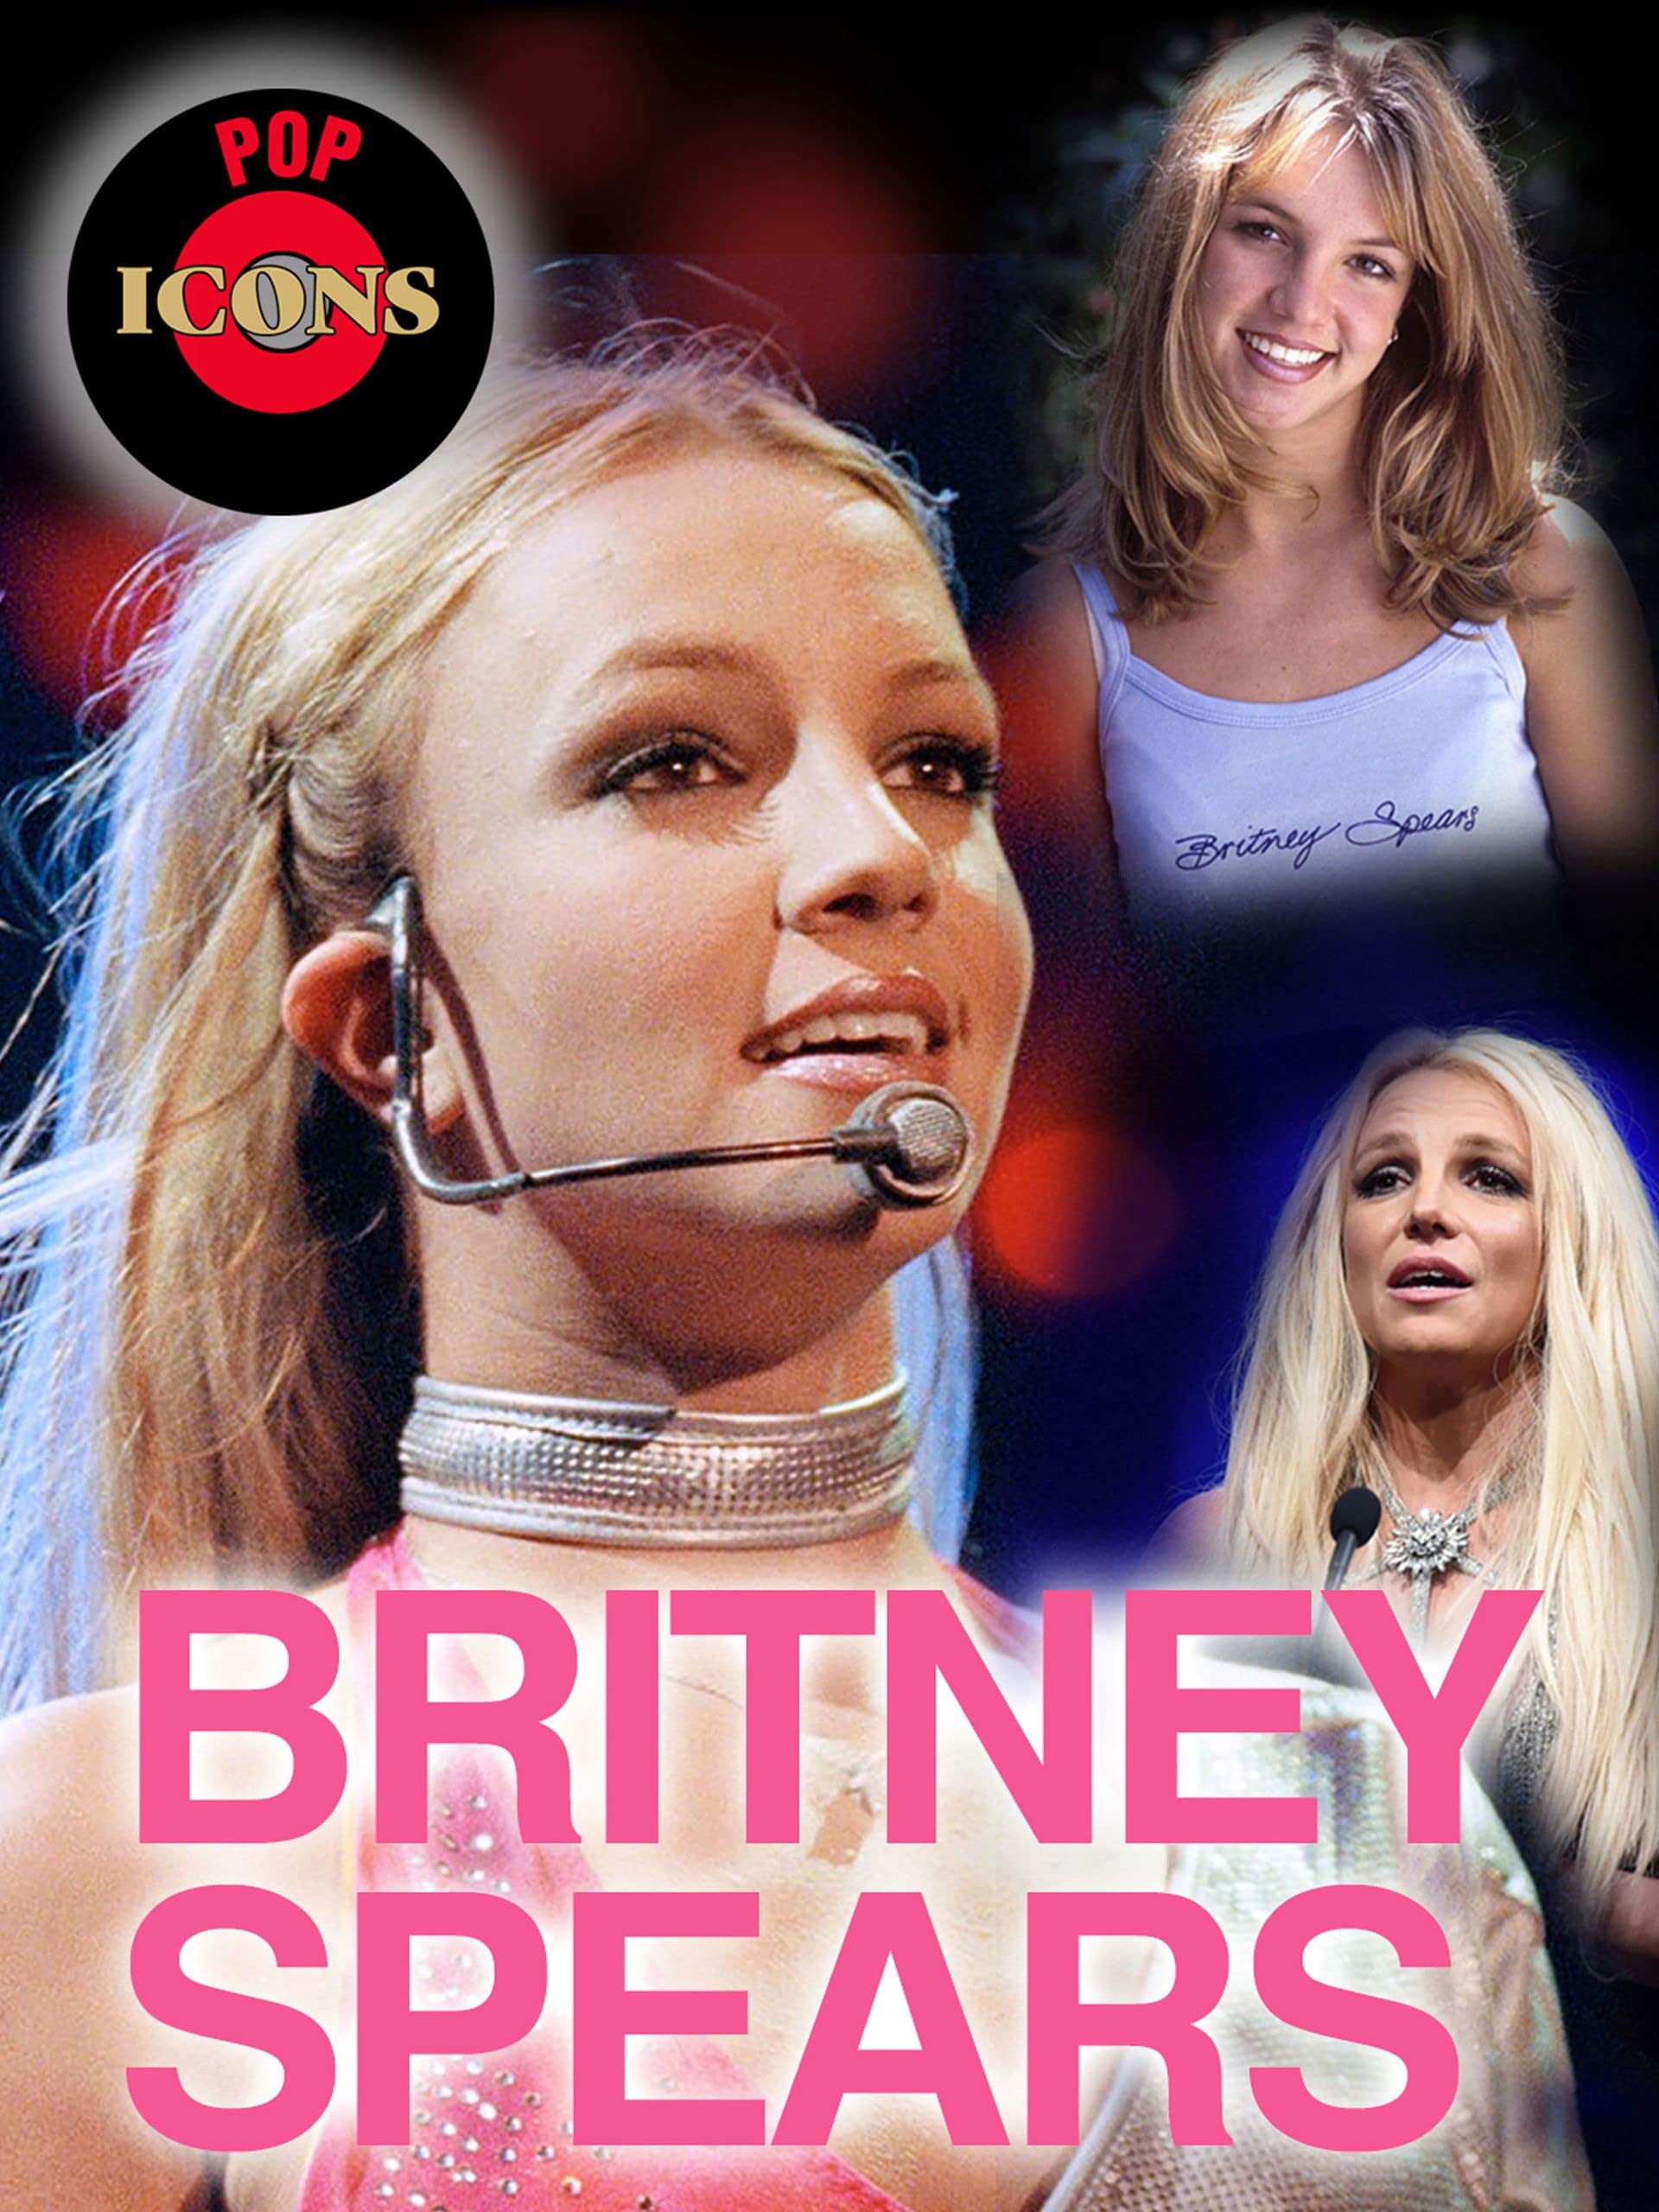 Britney Spears in the 90s: The Birth of a Pop Icon